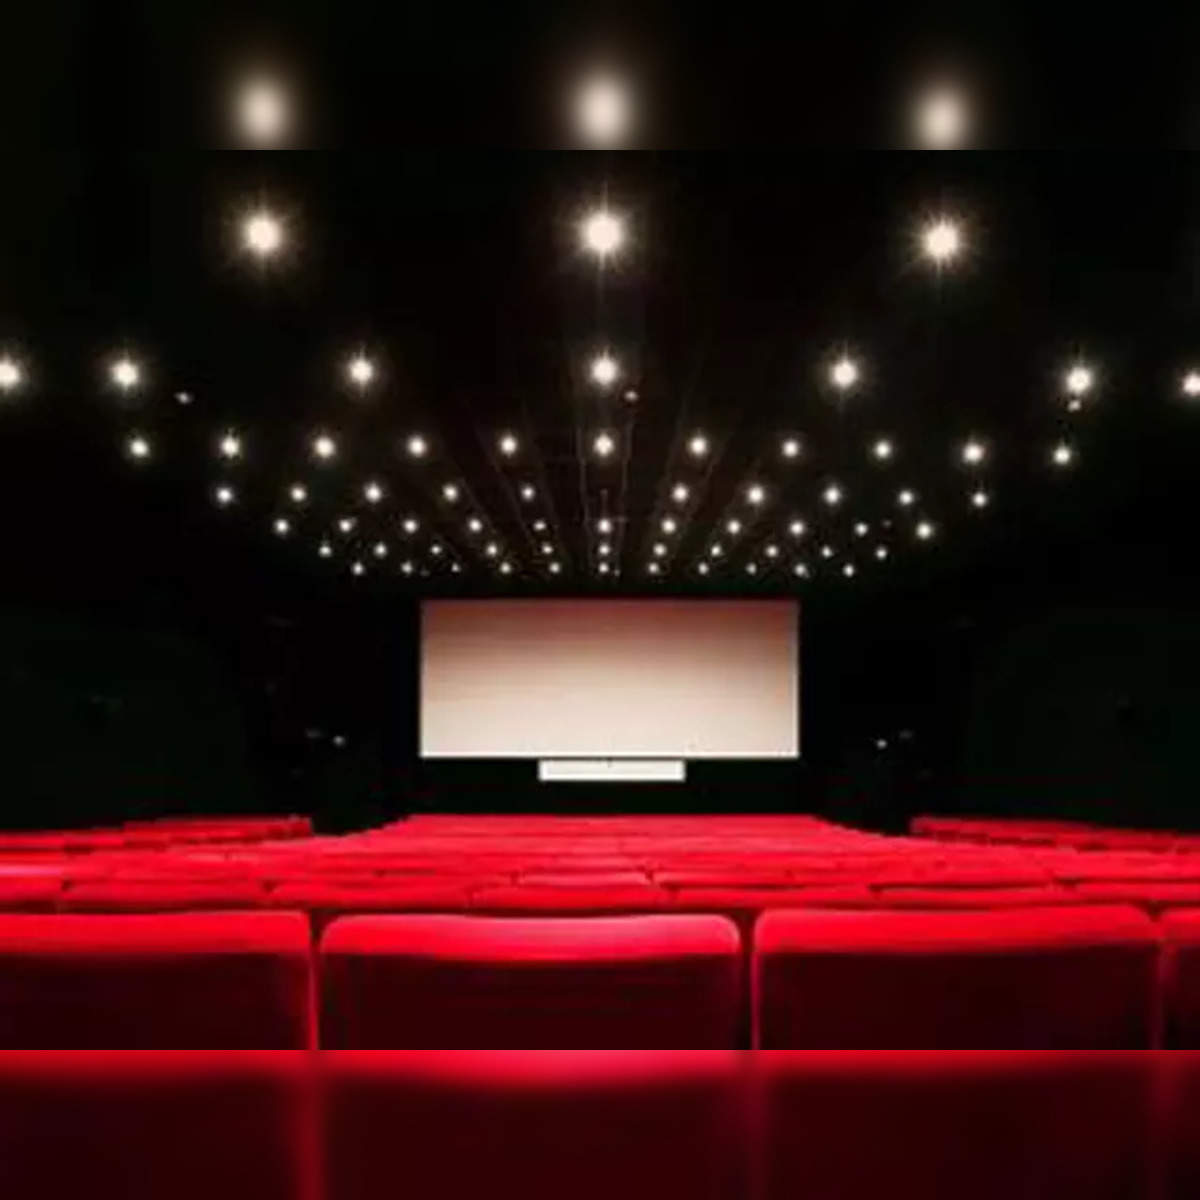 Two Young Men Watching Movie in Theatre - Stock Photo - Masterfile -  Rights-Managed, Artist: Graham French, Code: 700-00086715